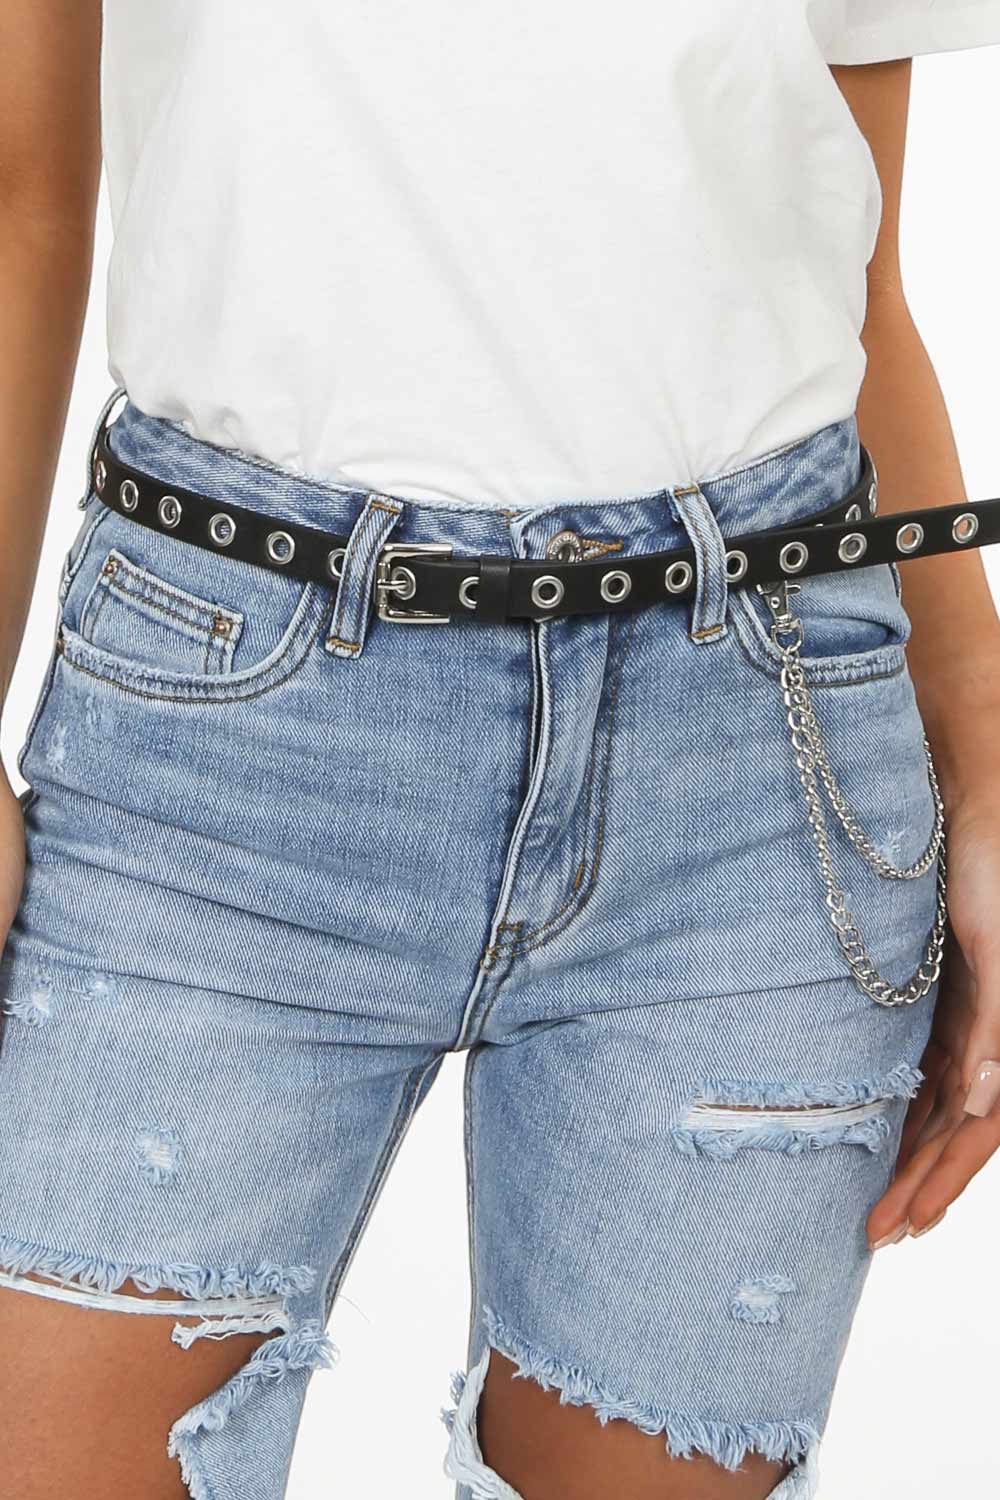 Black Eyelet Belt With Silver Chain